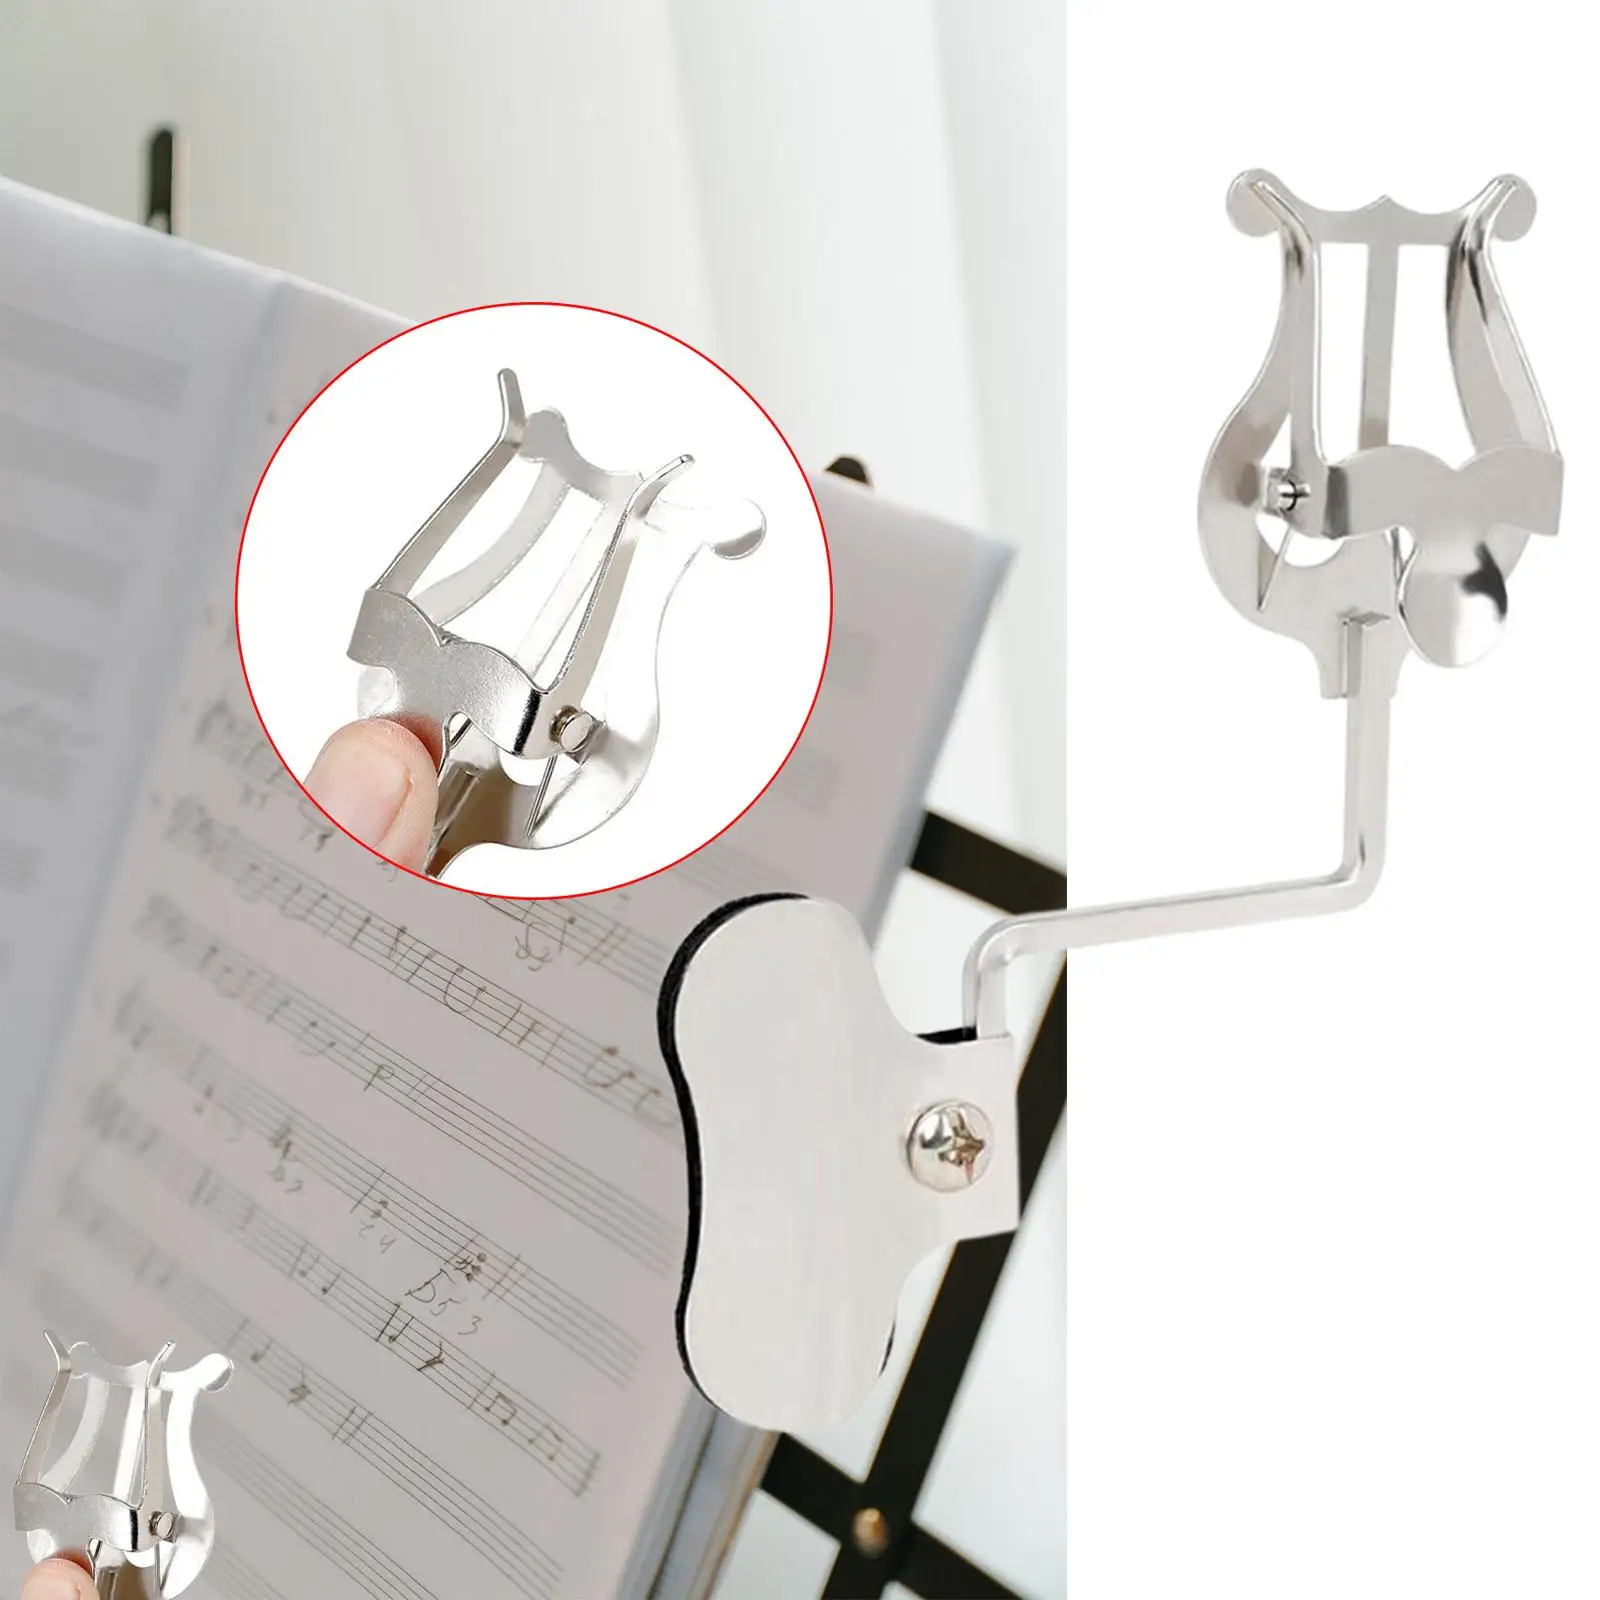 Trombone Music Clip Portable Trumpet Marching Clamp for Trumpet Daily Use Exercise Gift